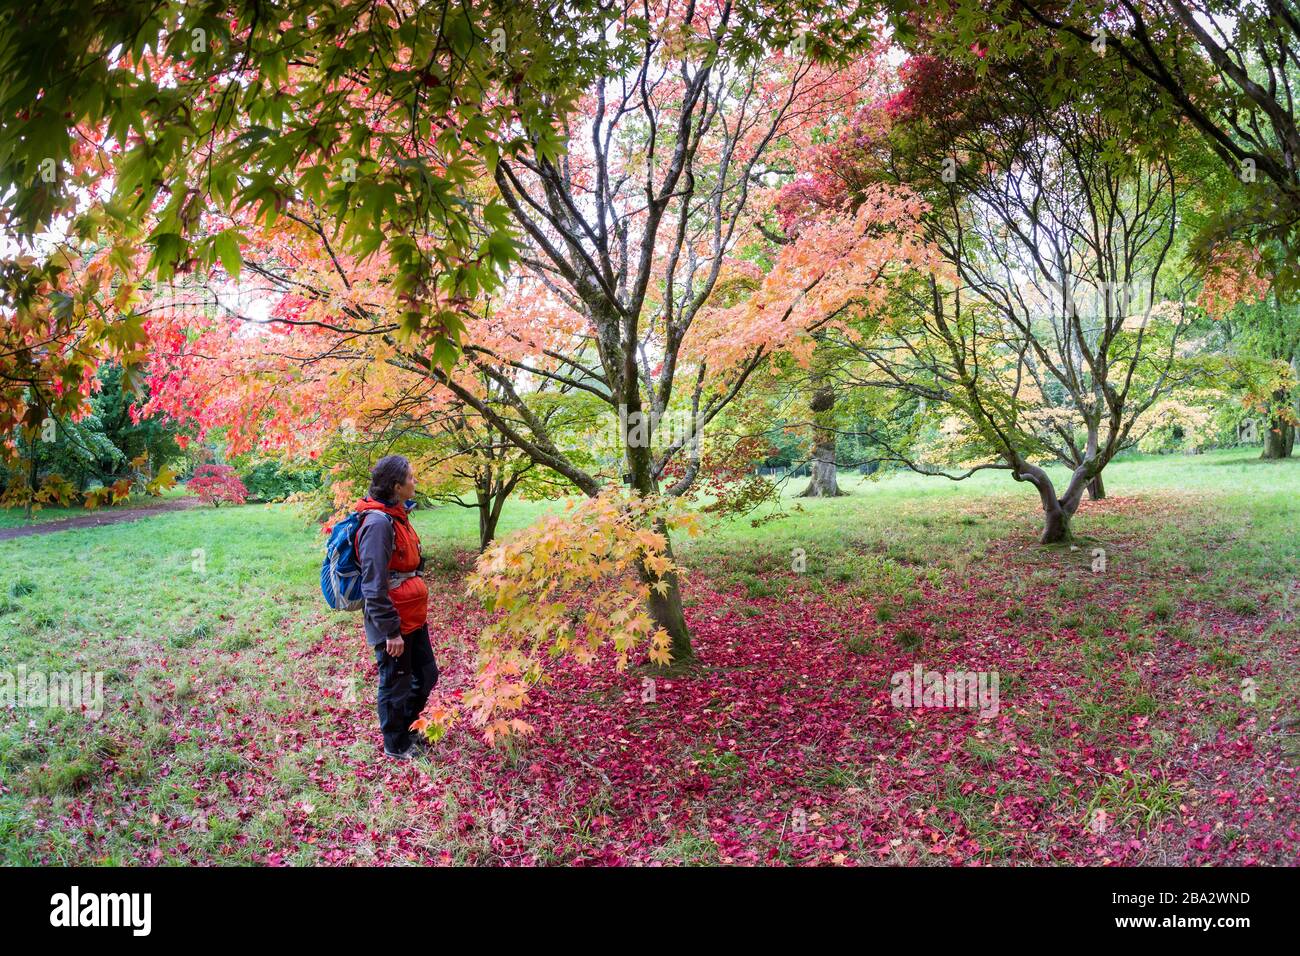 Acer leaves fallen on ground and person looking at trees, Westonbirt Arboretum, Gloucestershire, Enhgland, UK Stock Photo